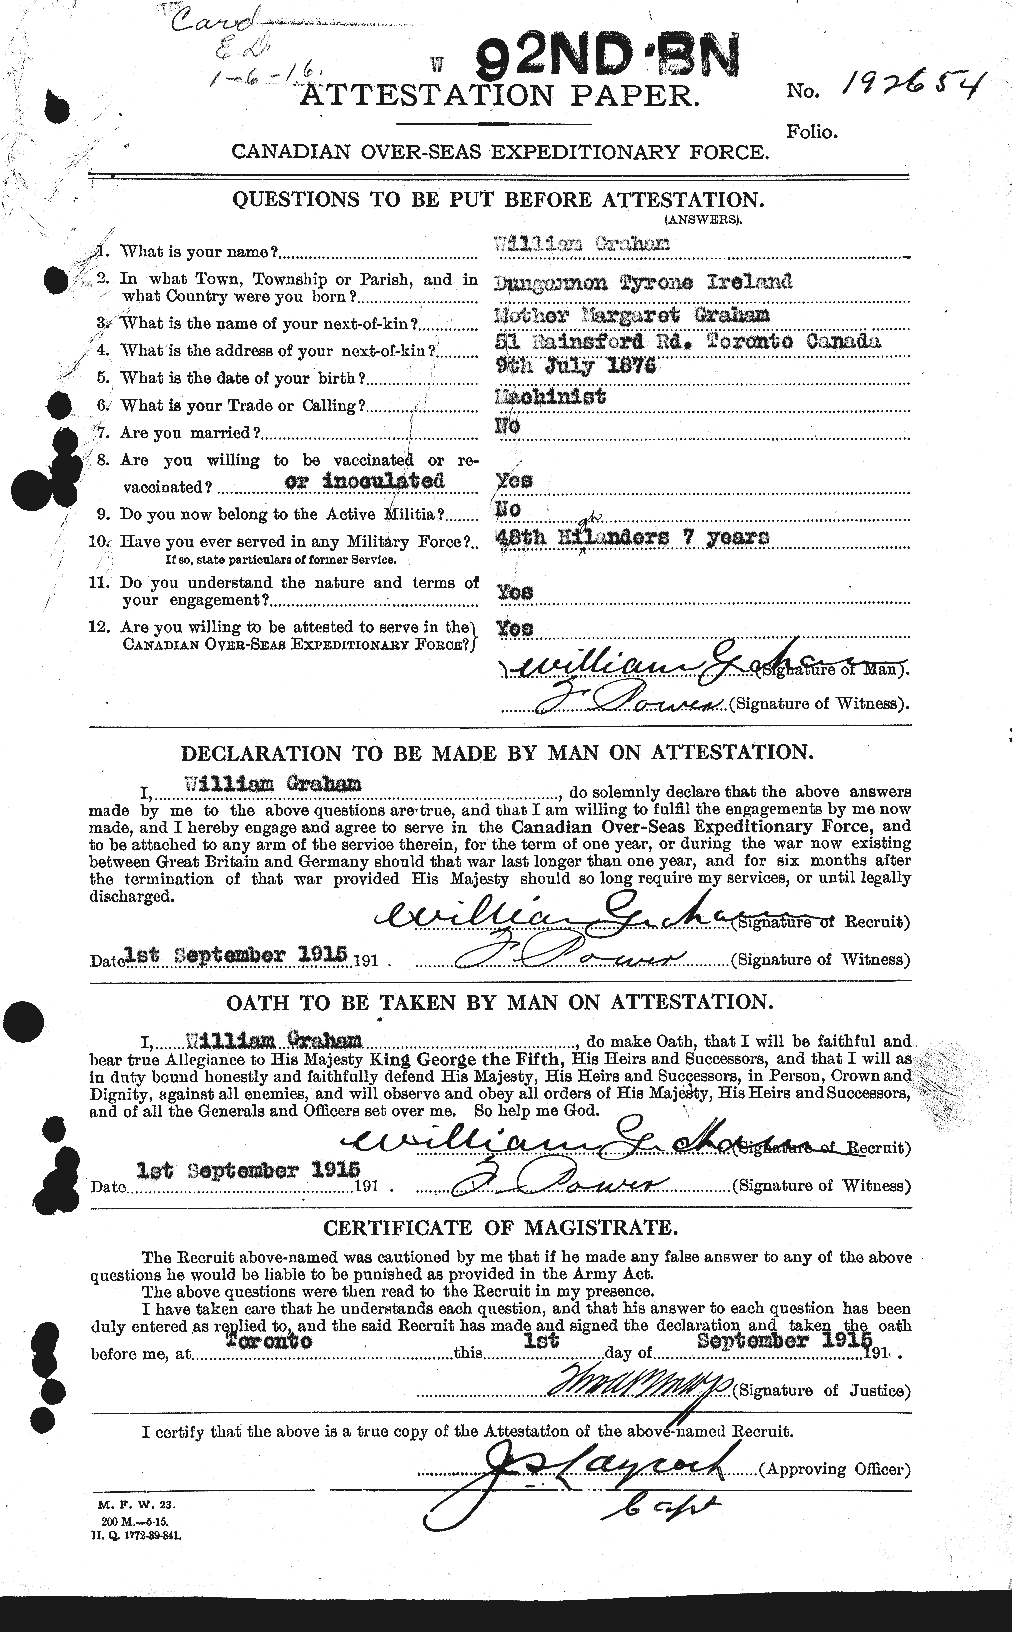 Personnel Records of the First World War - CEF 362706a